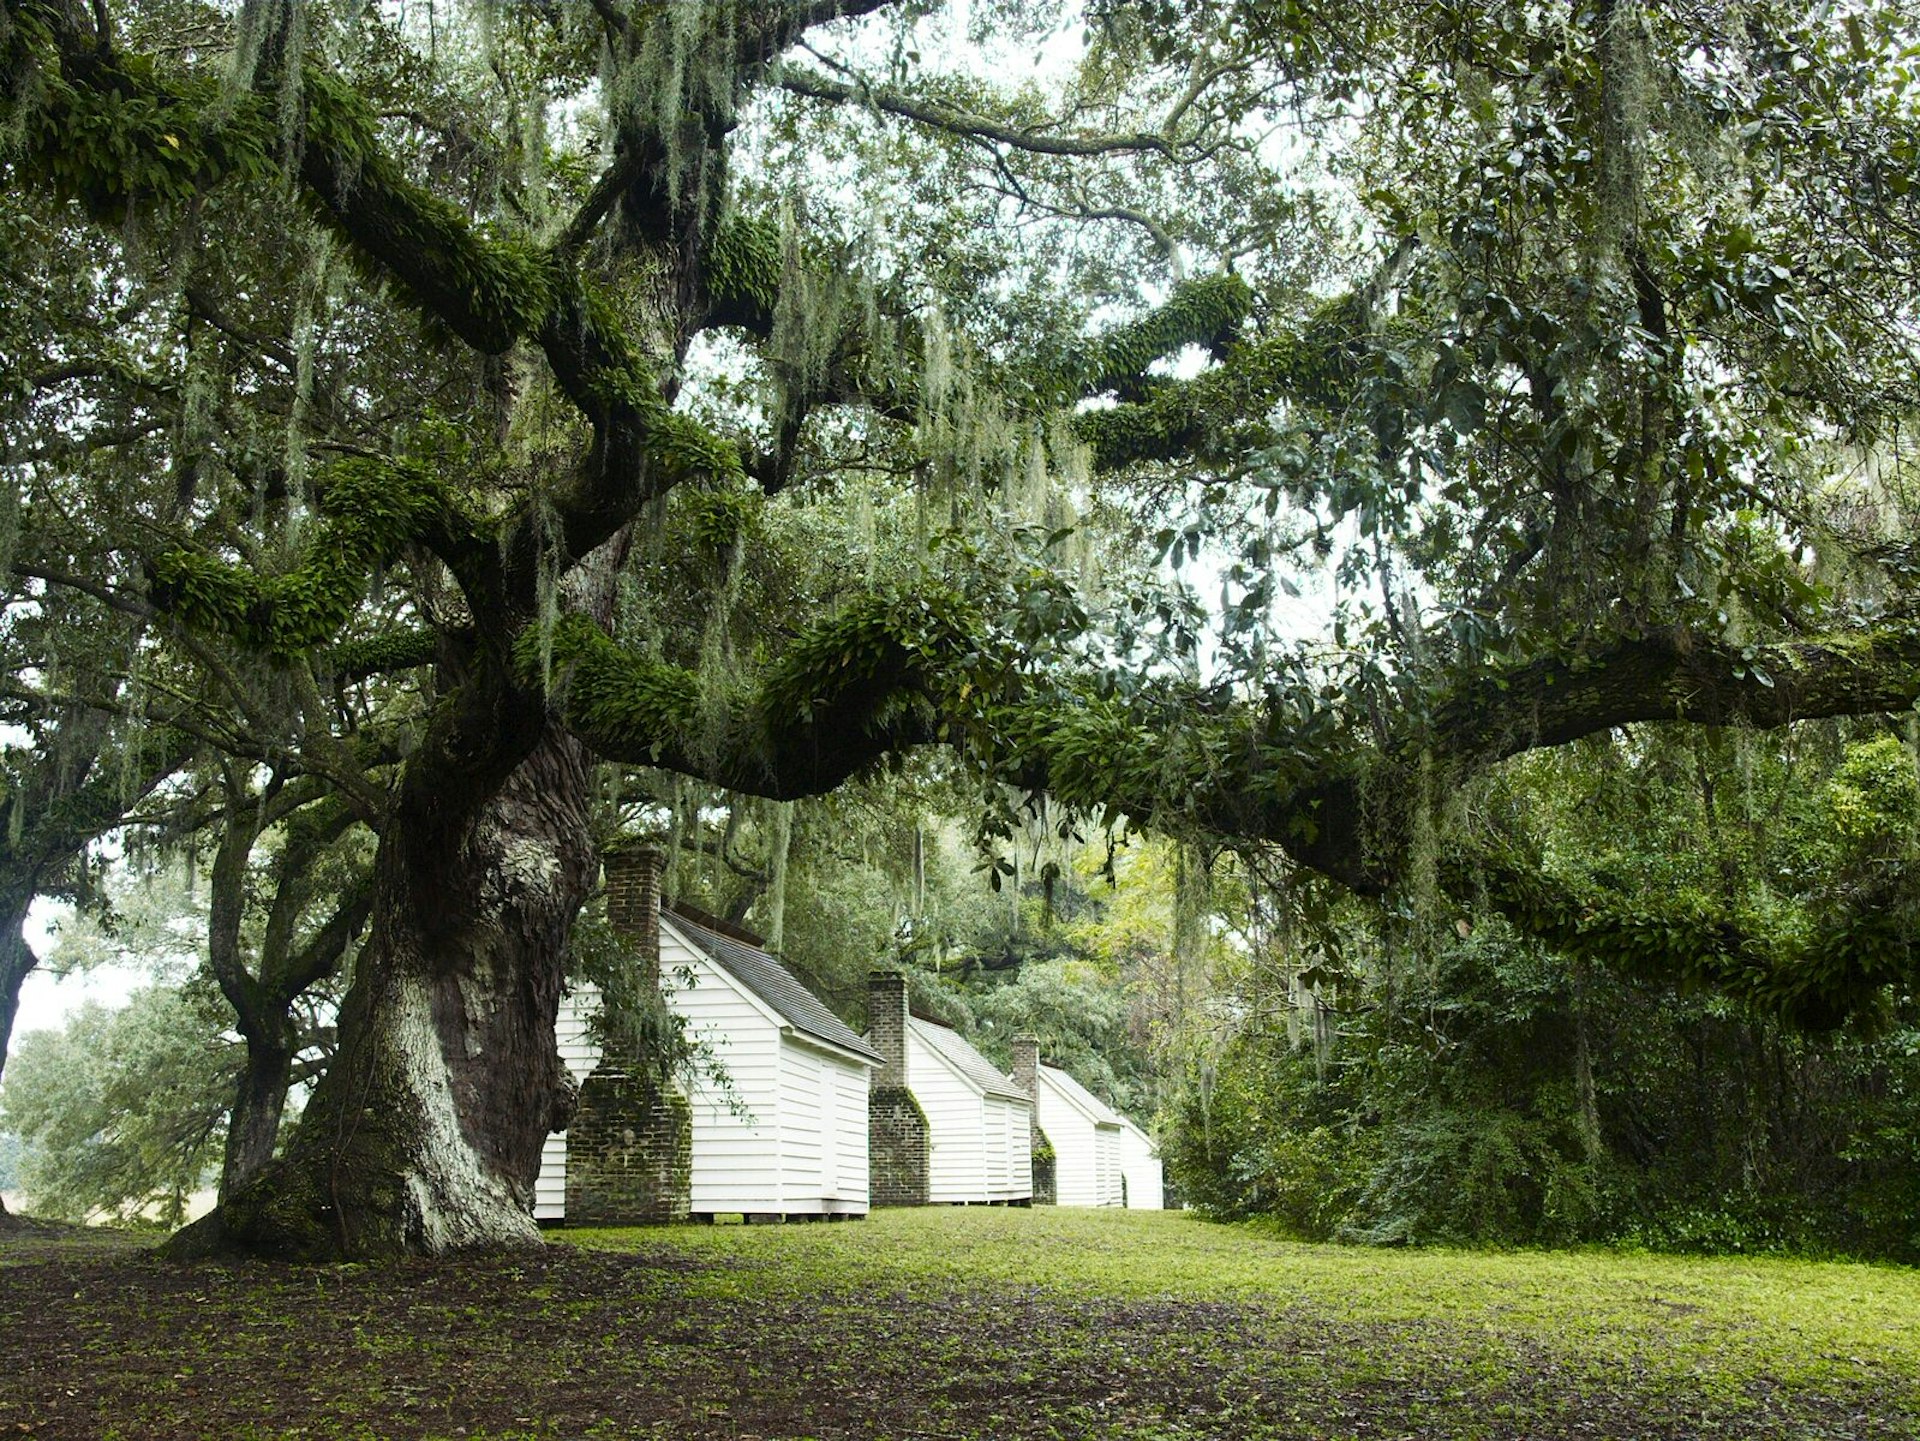 Clayboard slave cabins at the Mcleod Plantation © Andrew Montgomery / Lonely Planet